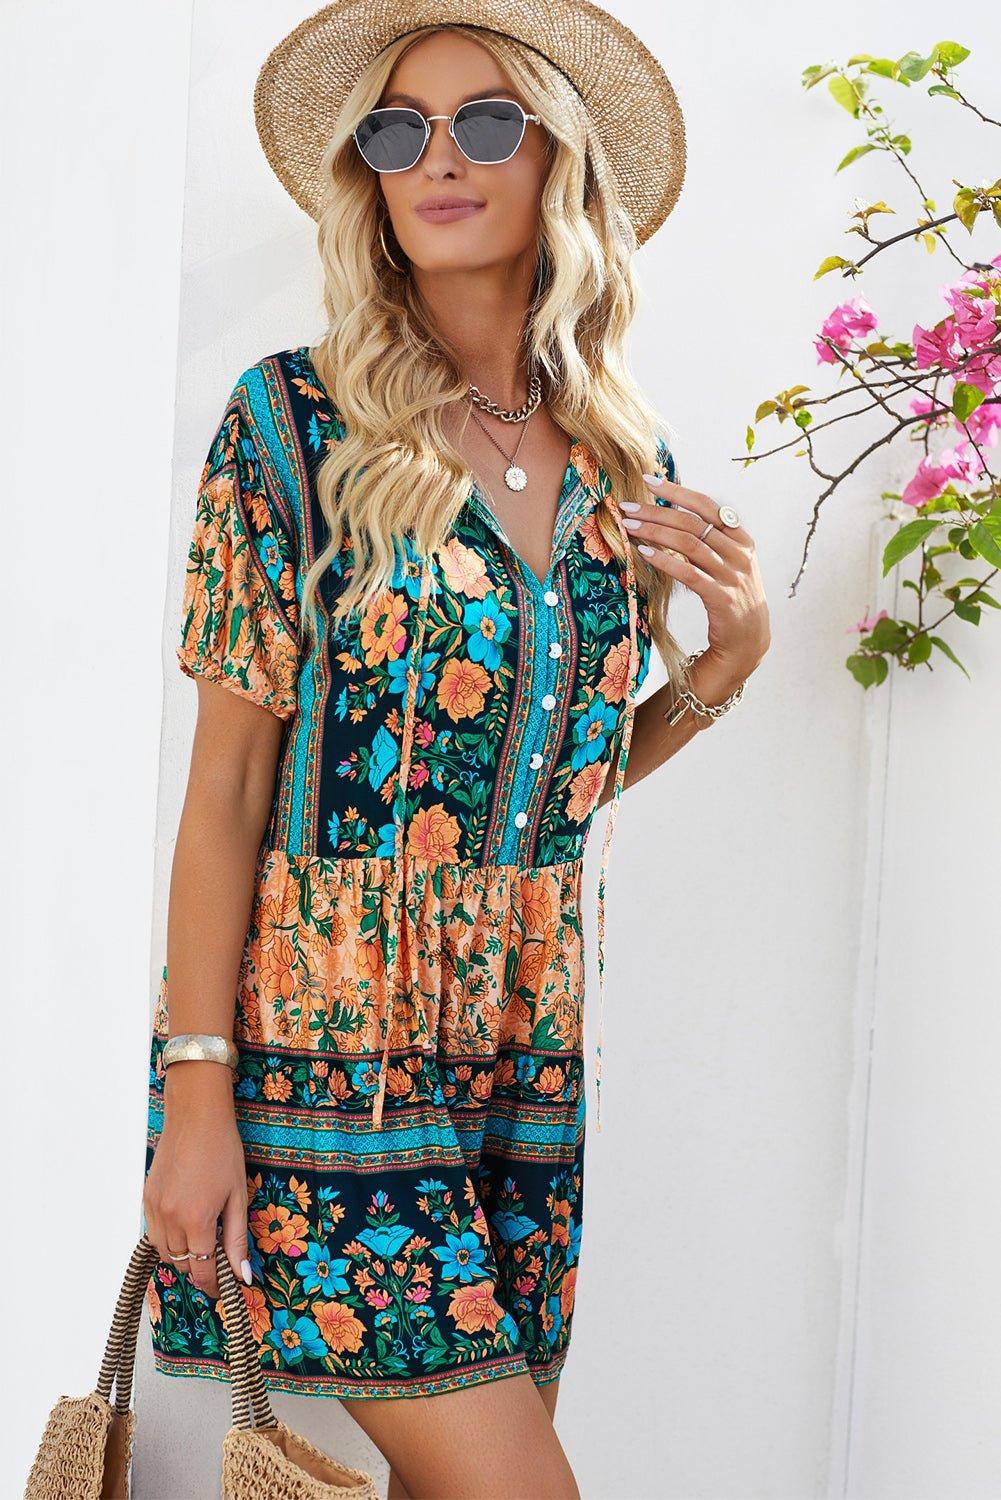 Boho Floral Multicolored Tie-Neck Romper  Romper dress Playsuit Short rompers for women  Sunset and Swim   